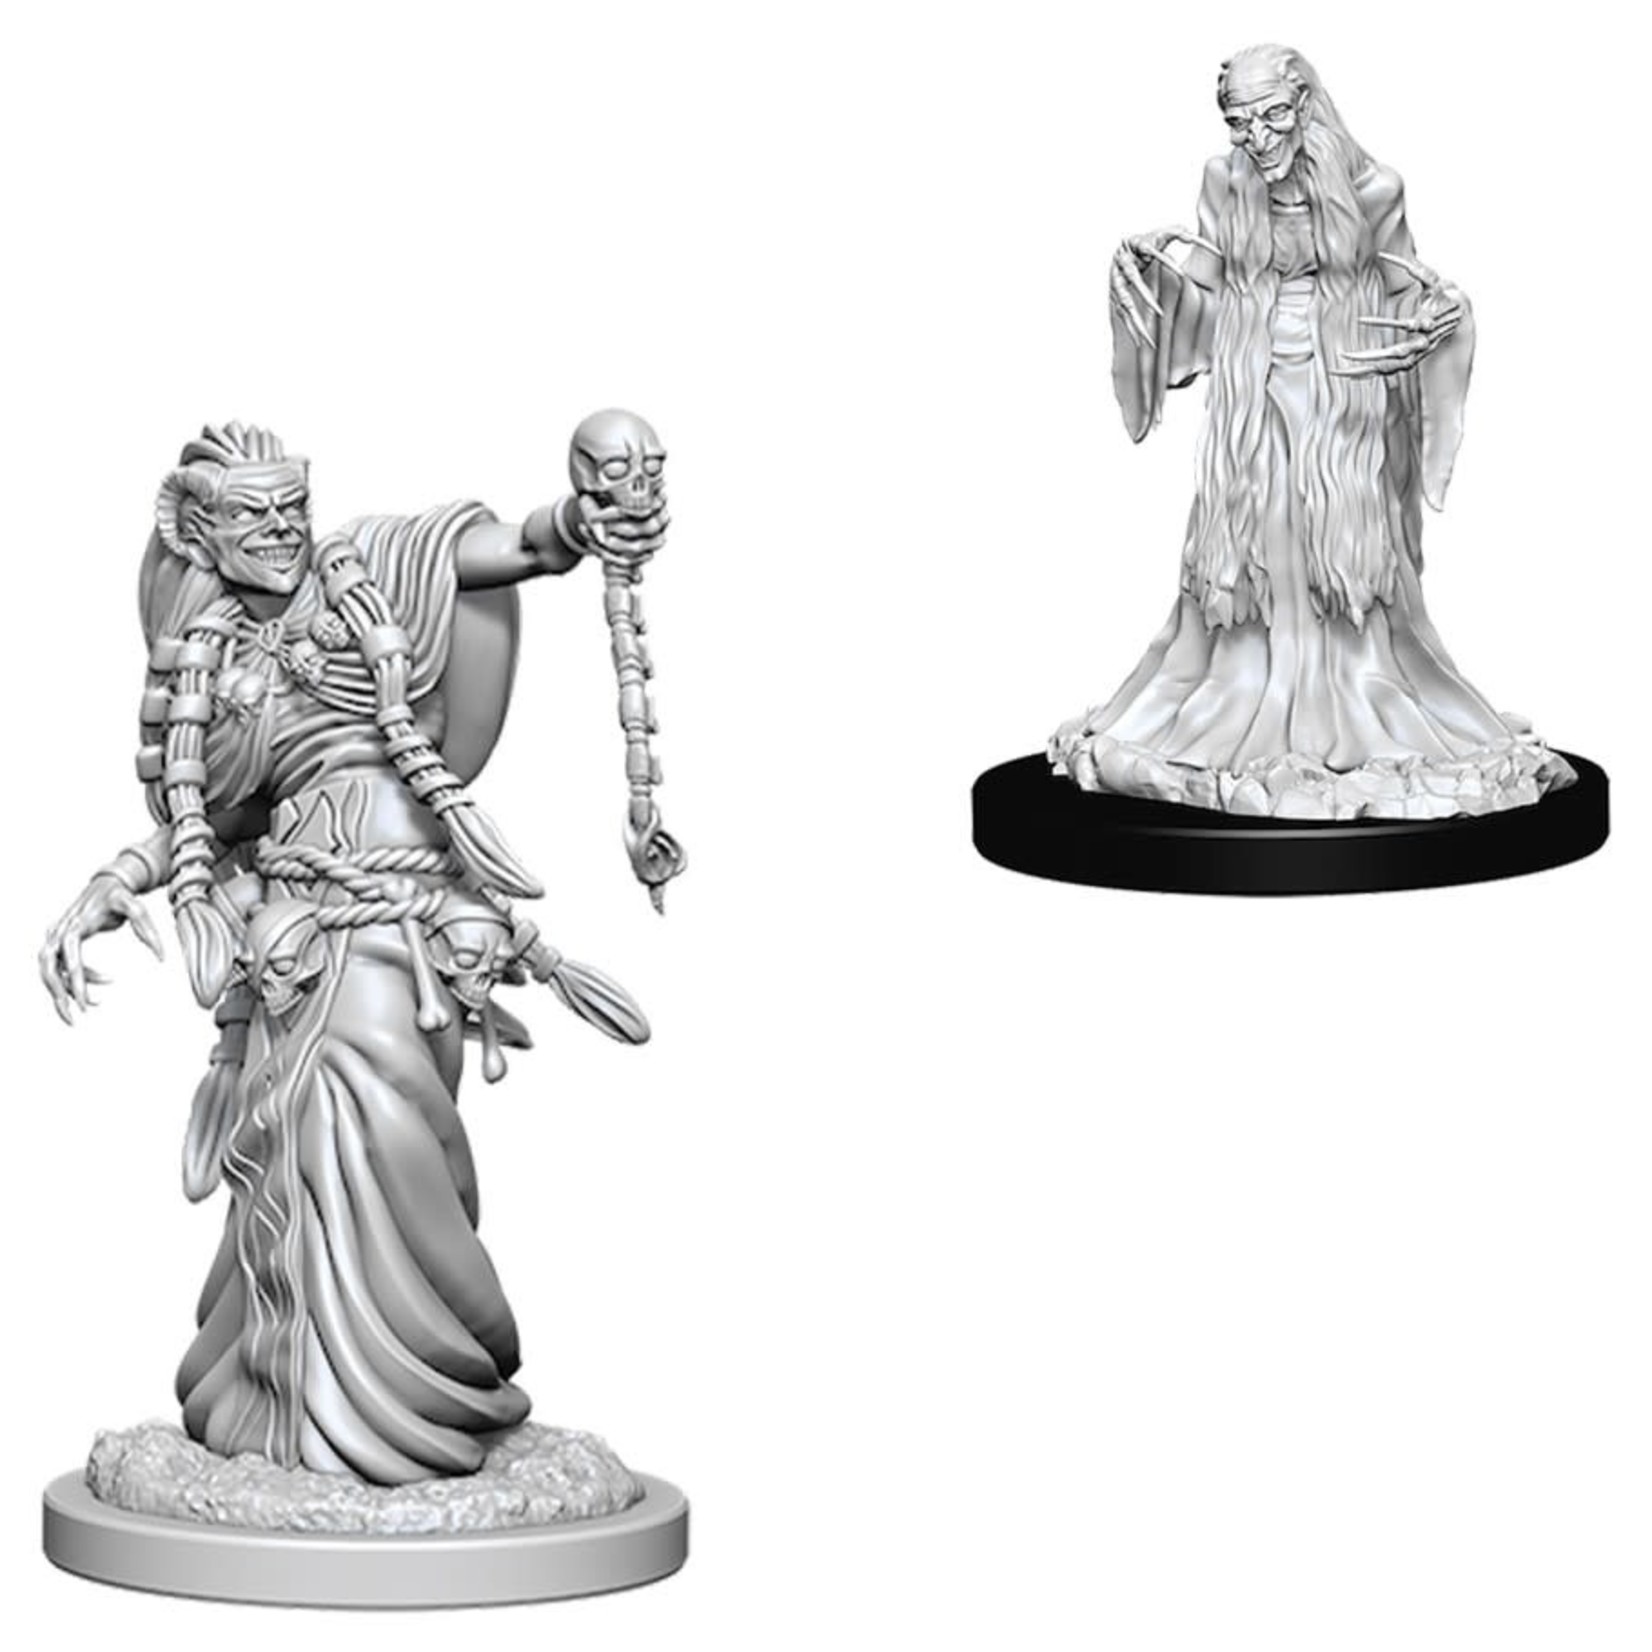 WizKids Dungeons and Dragons Nolzur's Marvelous Minis Green Hag and Night Hag